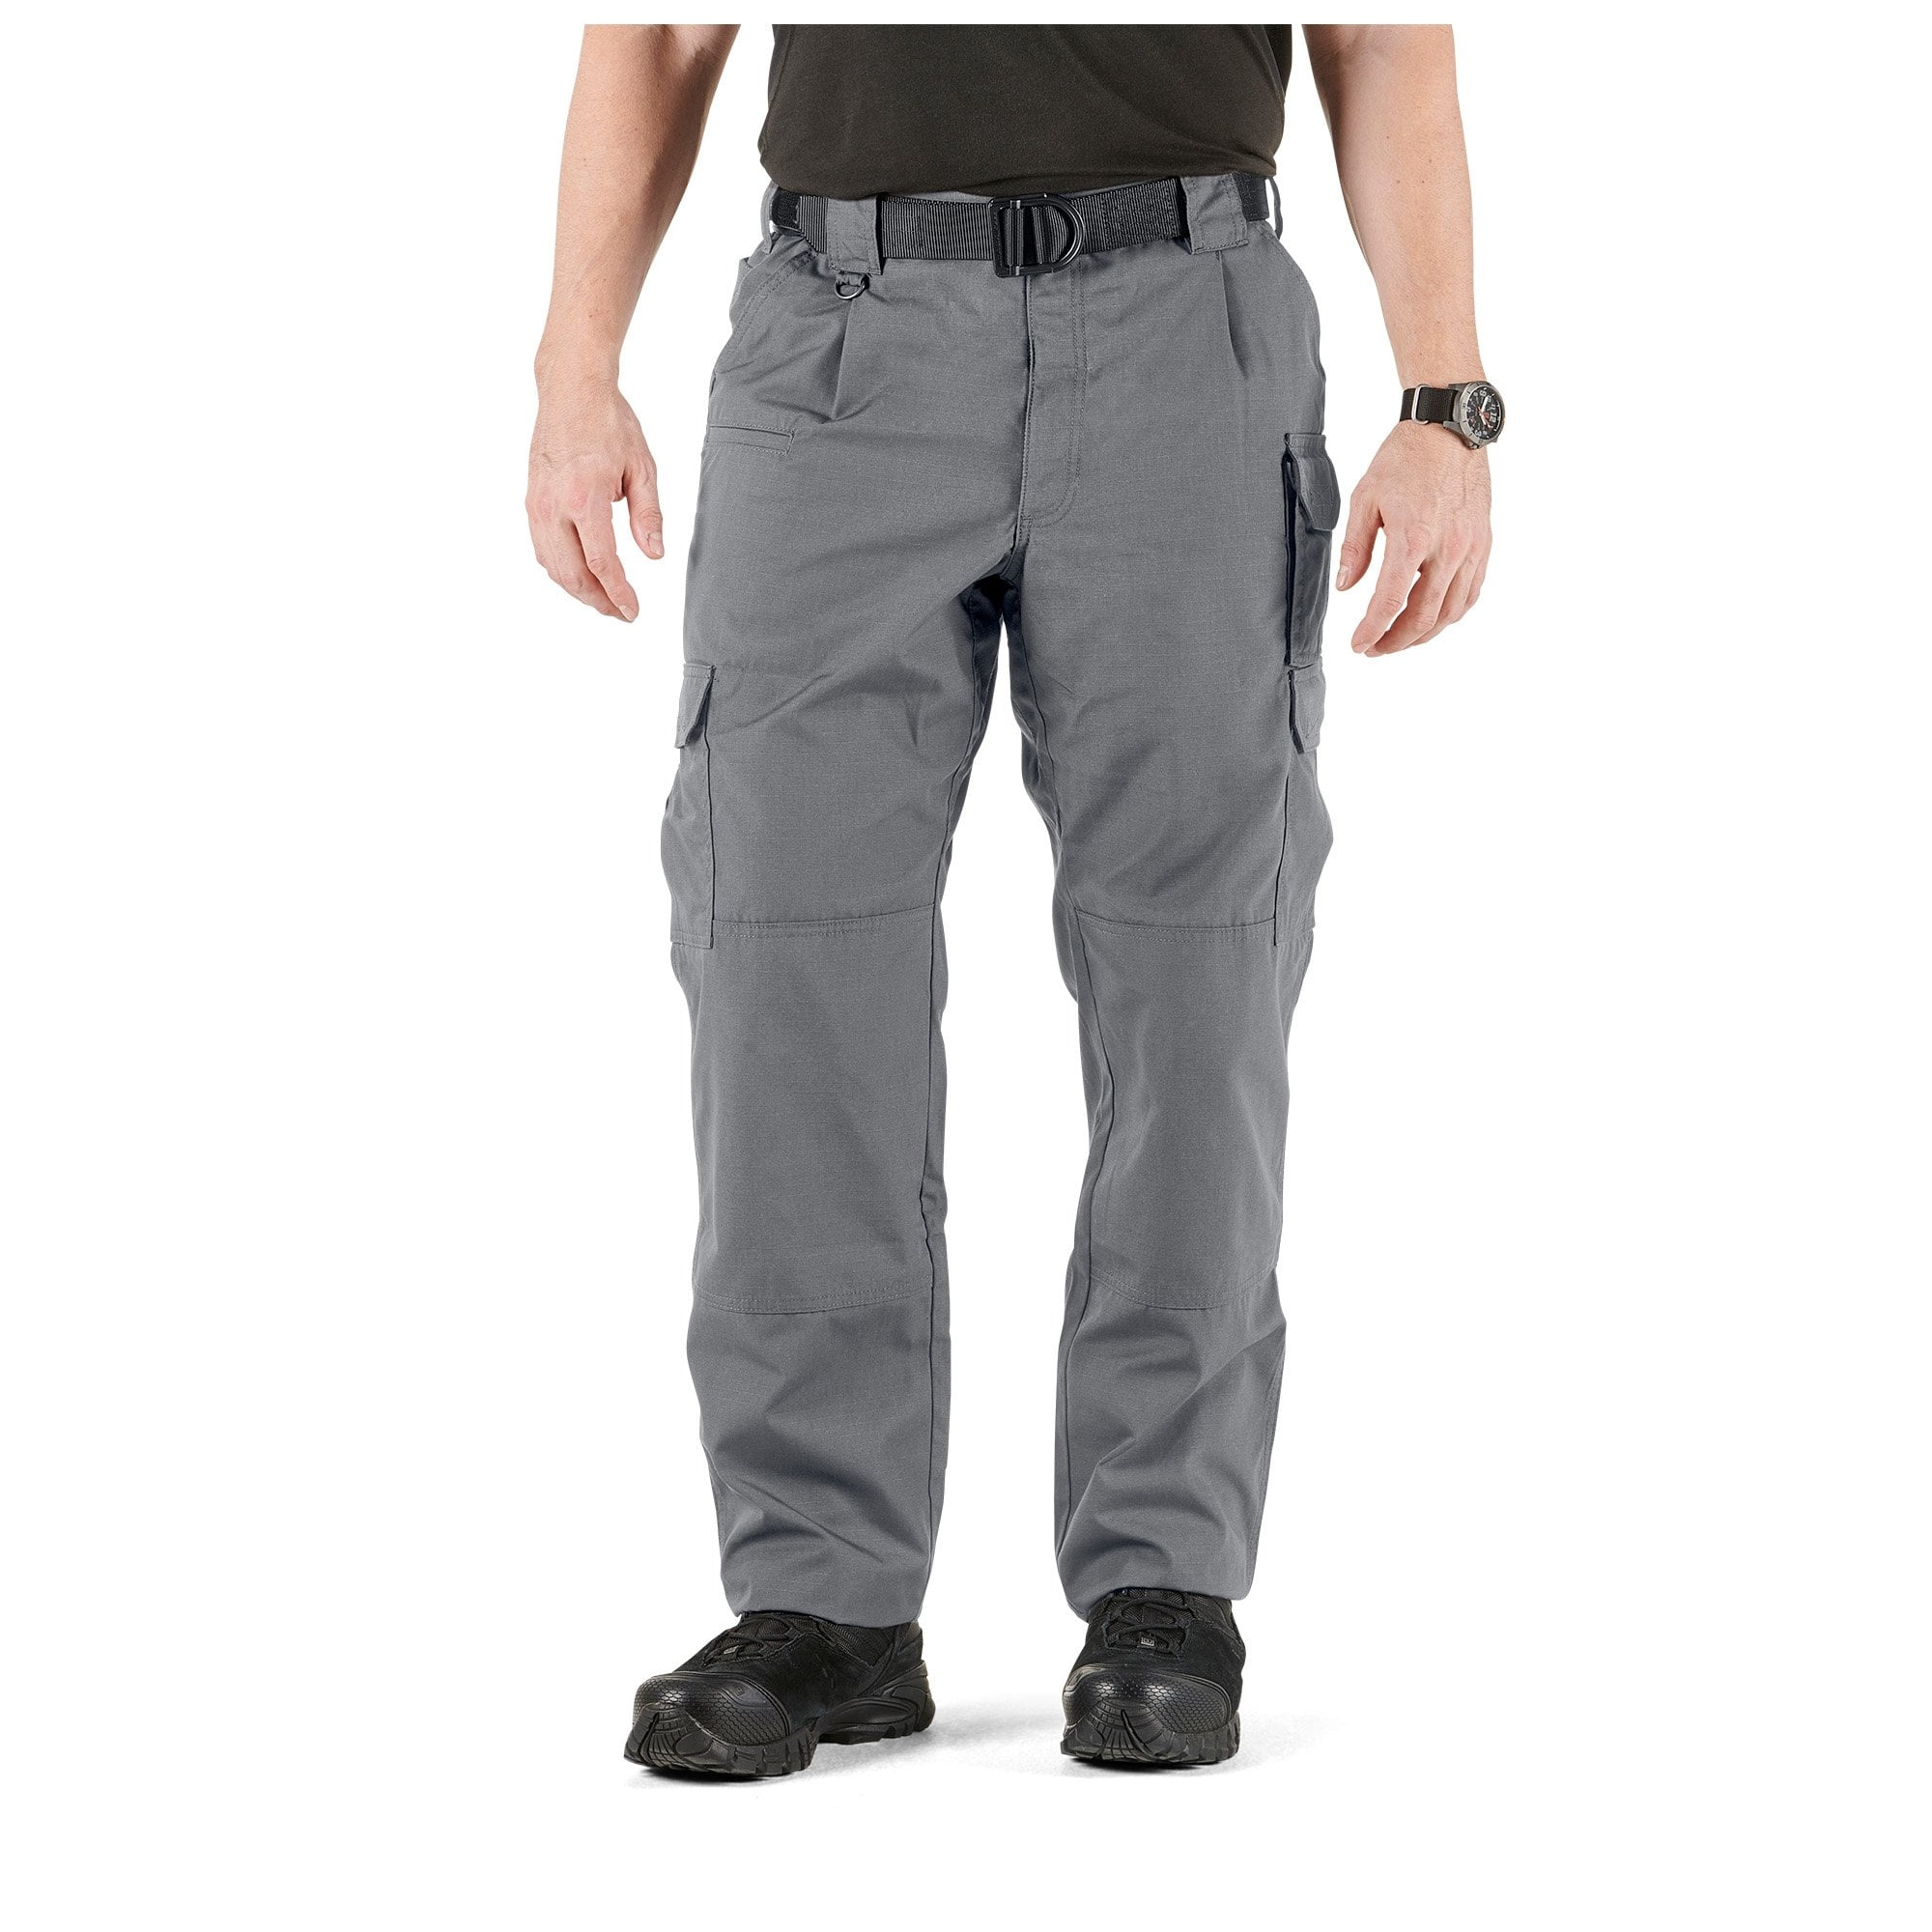 Cargo Pockets Style 74273 Action Waistband 5.11 Tactical Men's Taclite Pro Lightweight Performance Pants 